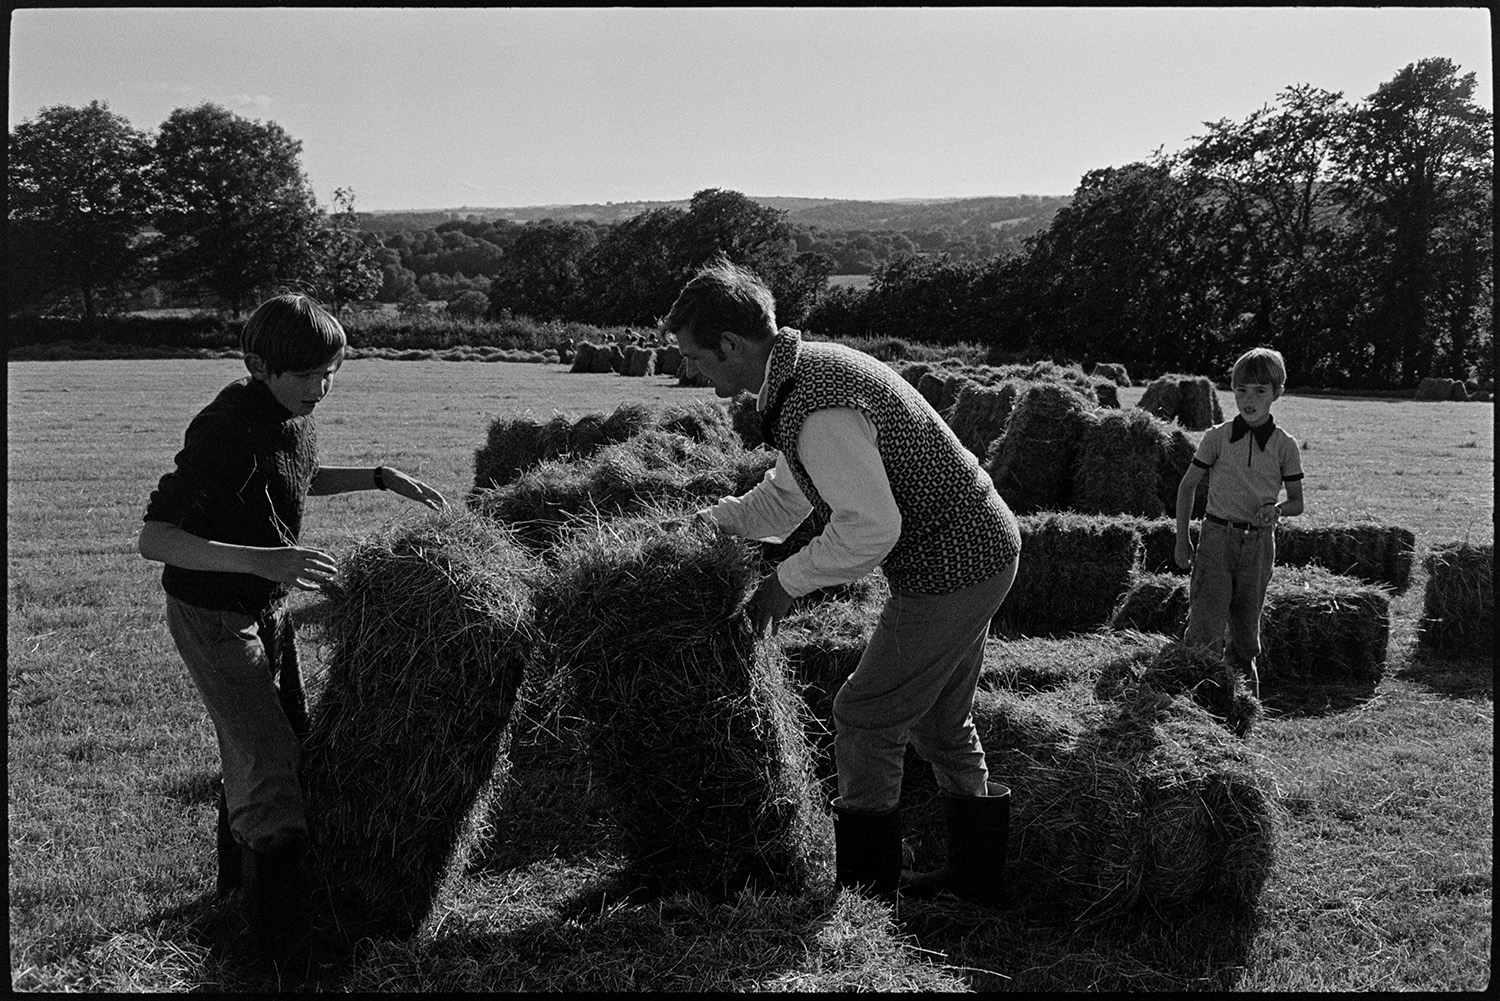 Children watching and helping farmer bale hay. 
[Two boys helping Michael Morpurgo stack bales of hay in a field at Parsonage, Iddesleigh.]